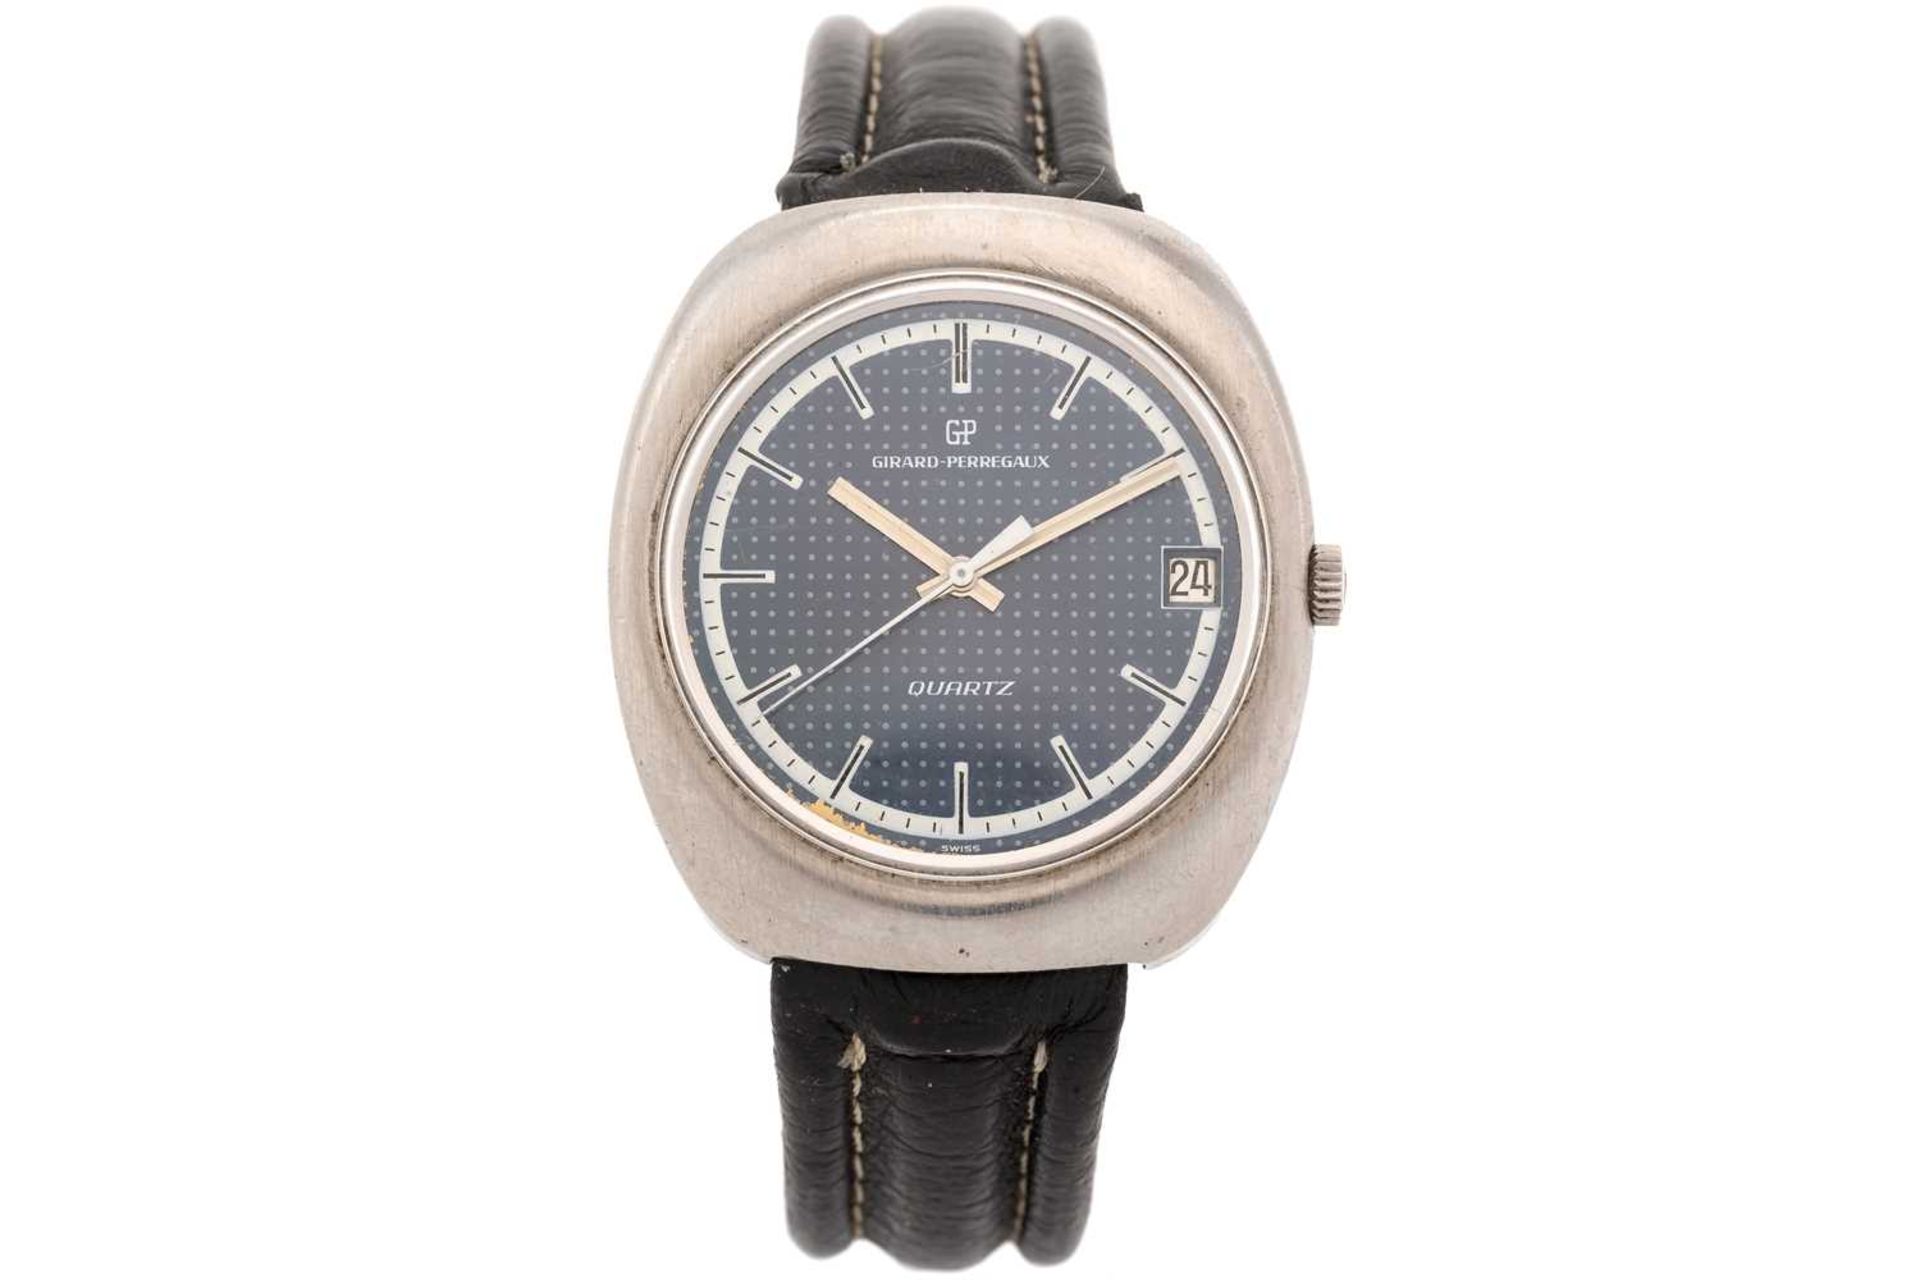 A Girard-Perregaux stainless steel quartz wristwatch, the blue speckled dial with baton indices